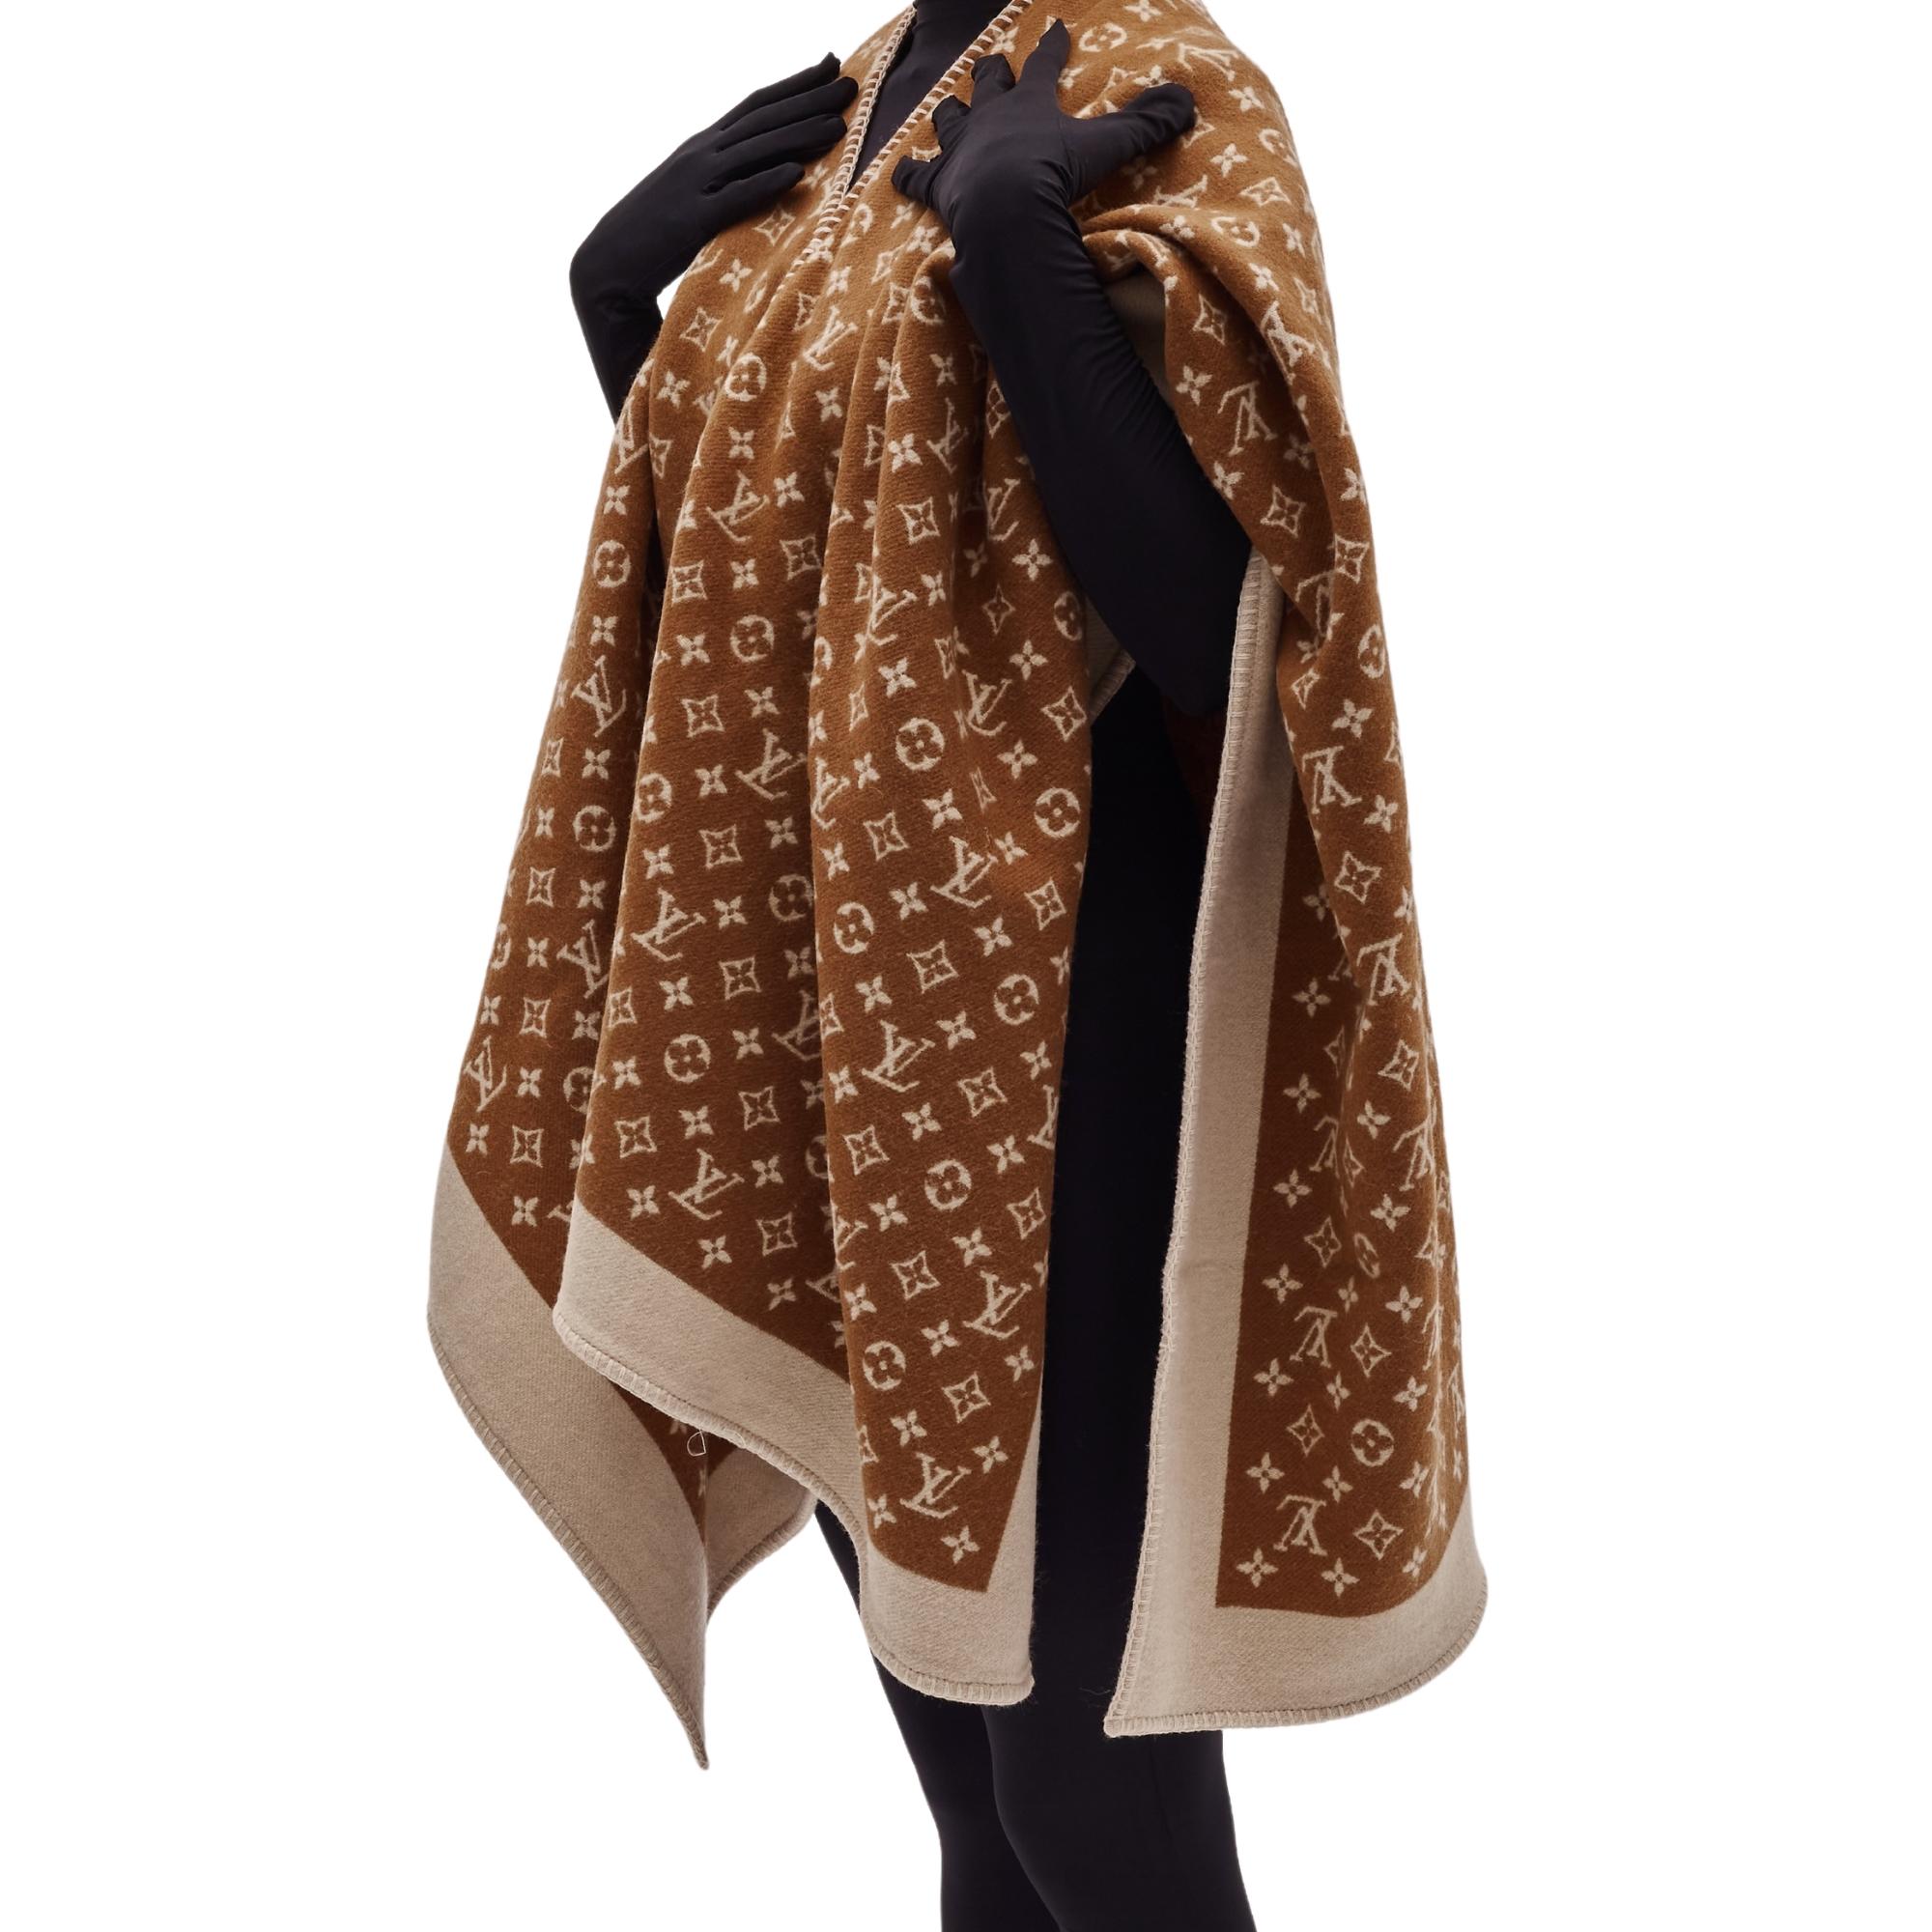 The Louis Embrace poncho is made with soft cashmere. The item features a classic Monogram pattern in brown with blanket finishing on the edges. A gleaming LV Circle pin lends a finishing touch and serves as a closure.

Color: brown
Material: soft